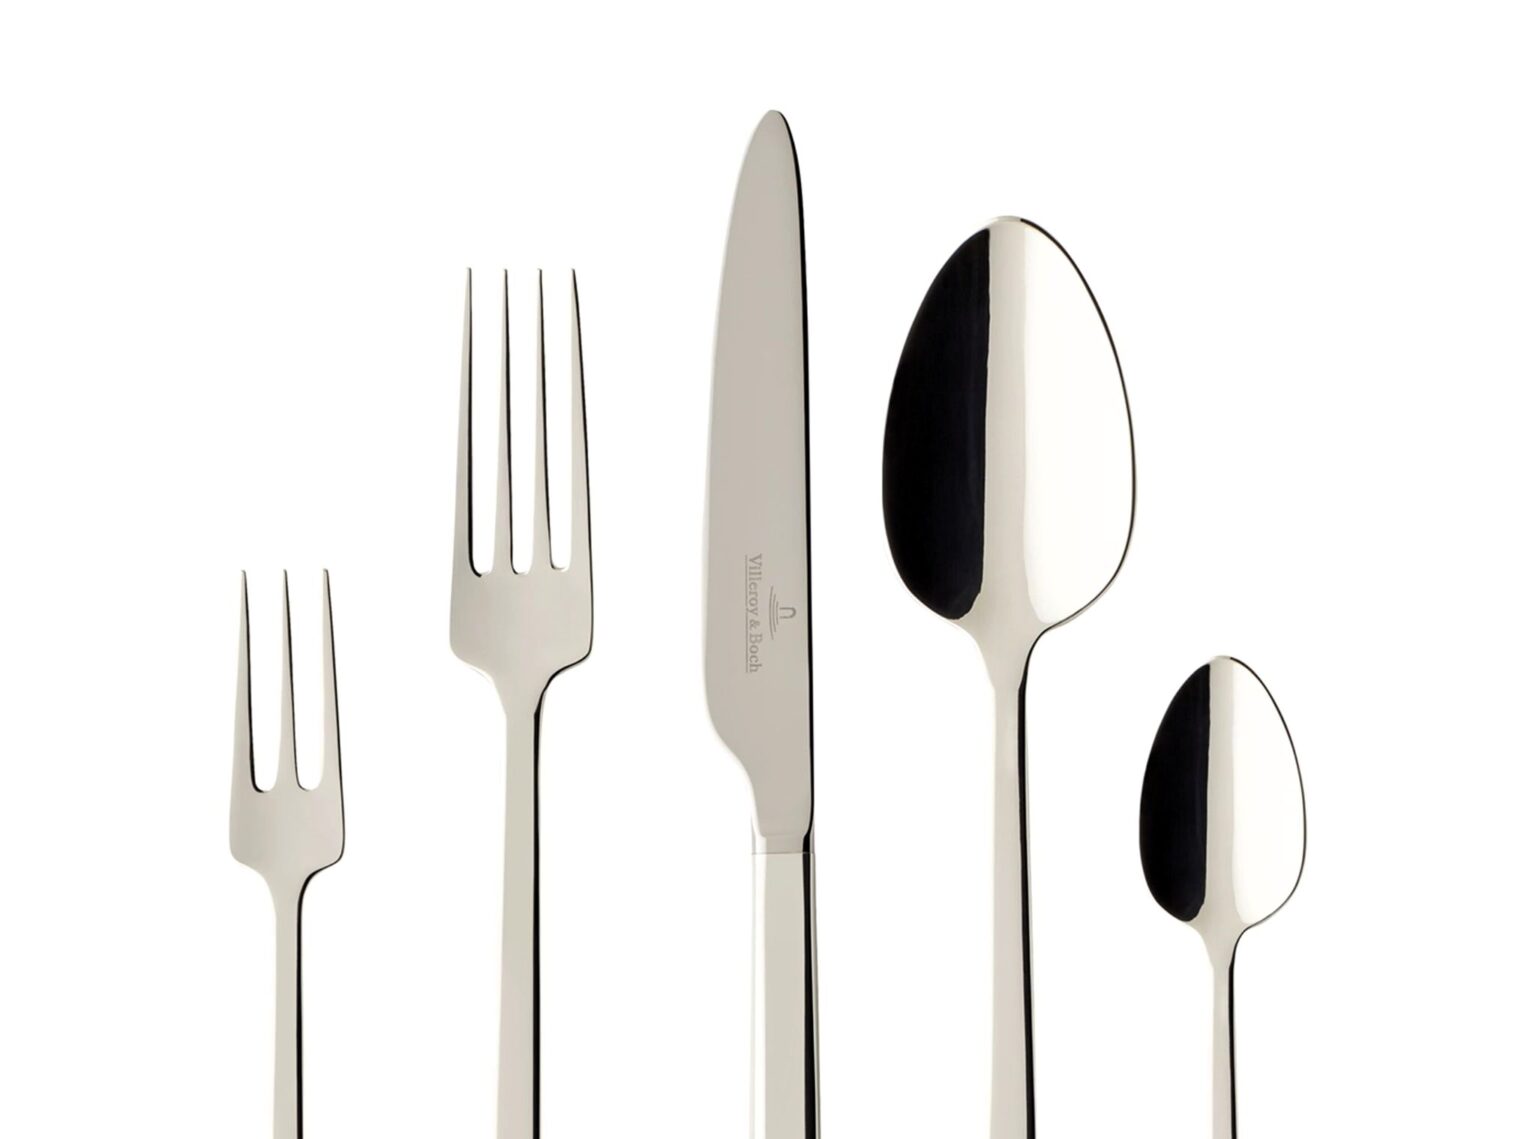 Harrods is selling a £2,759 cutlery set that resembles a £37 set from Sainsbury's. The 30-piece Villeroy & Boch set is made from silver-plated stainless steel, offering a luxurious touch for posh kitchens.